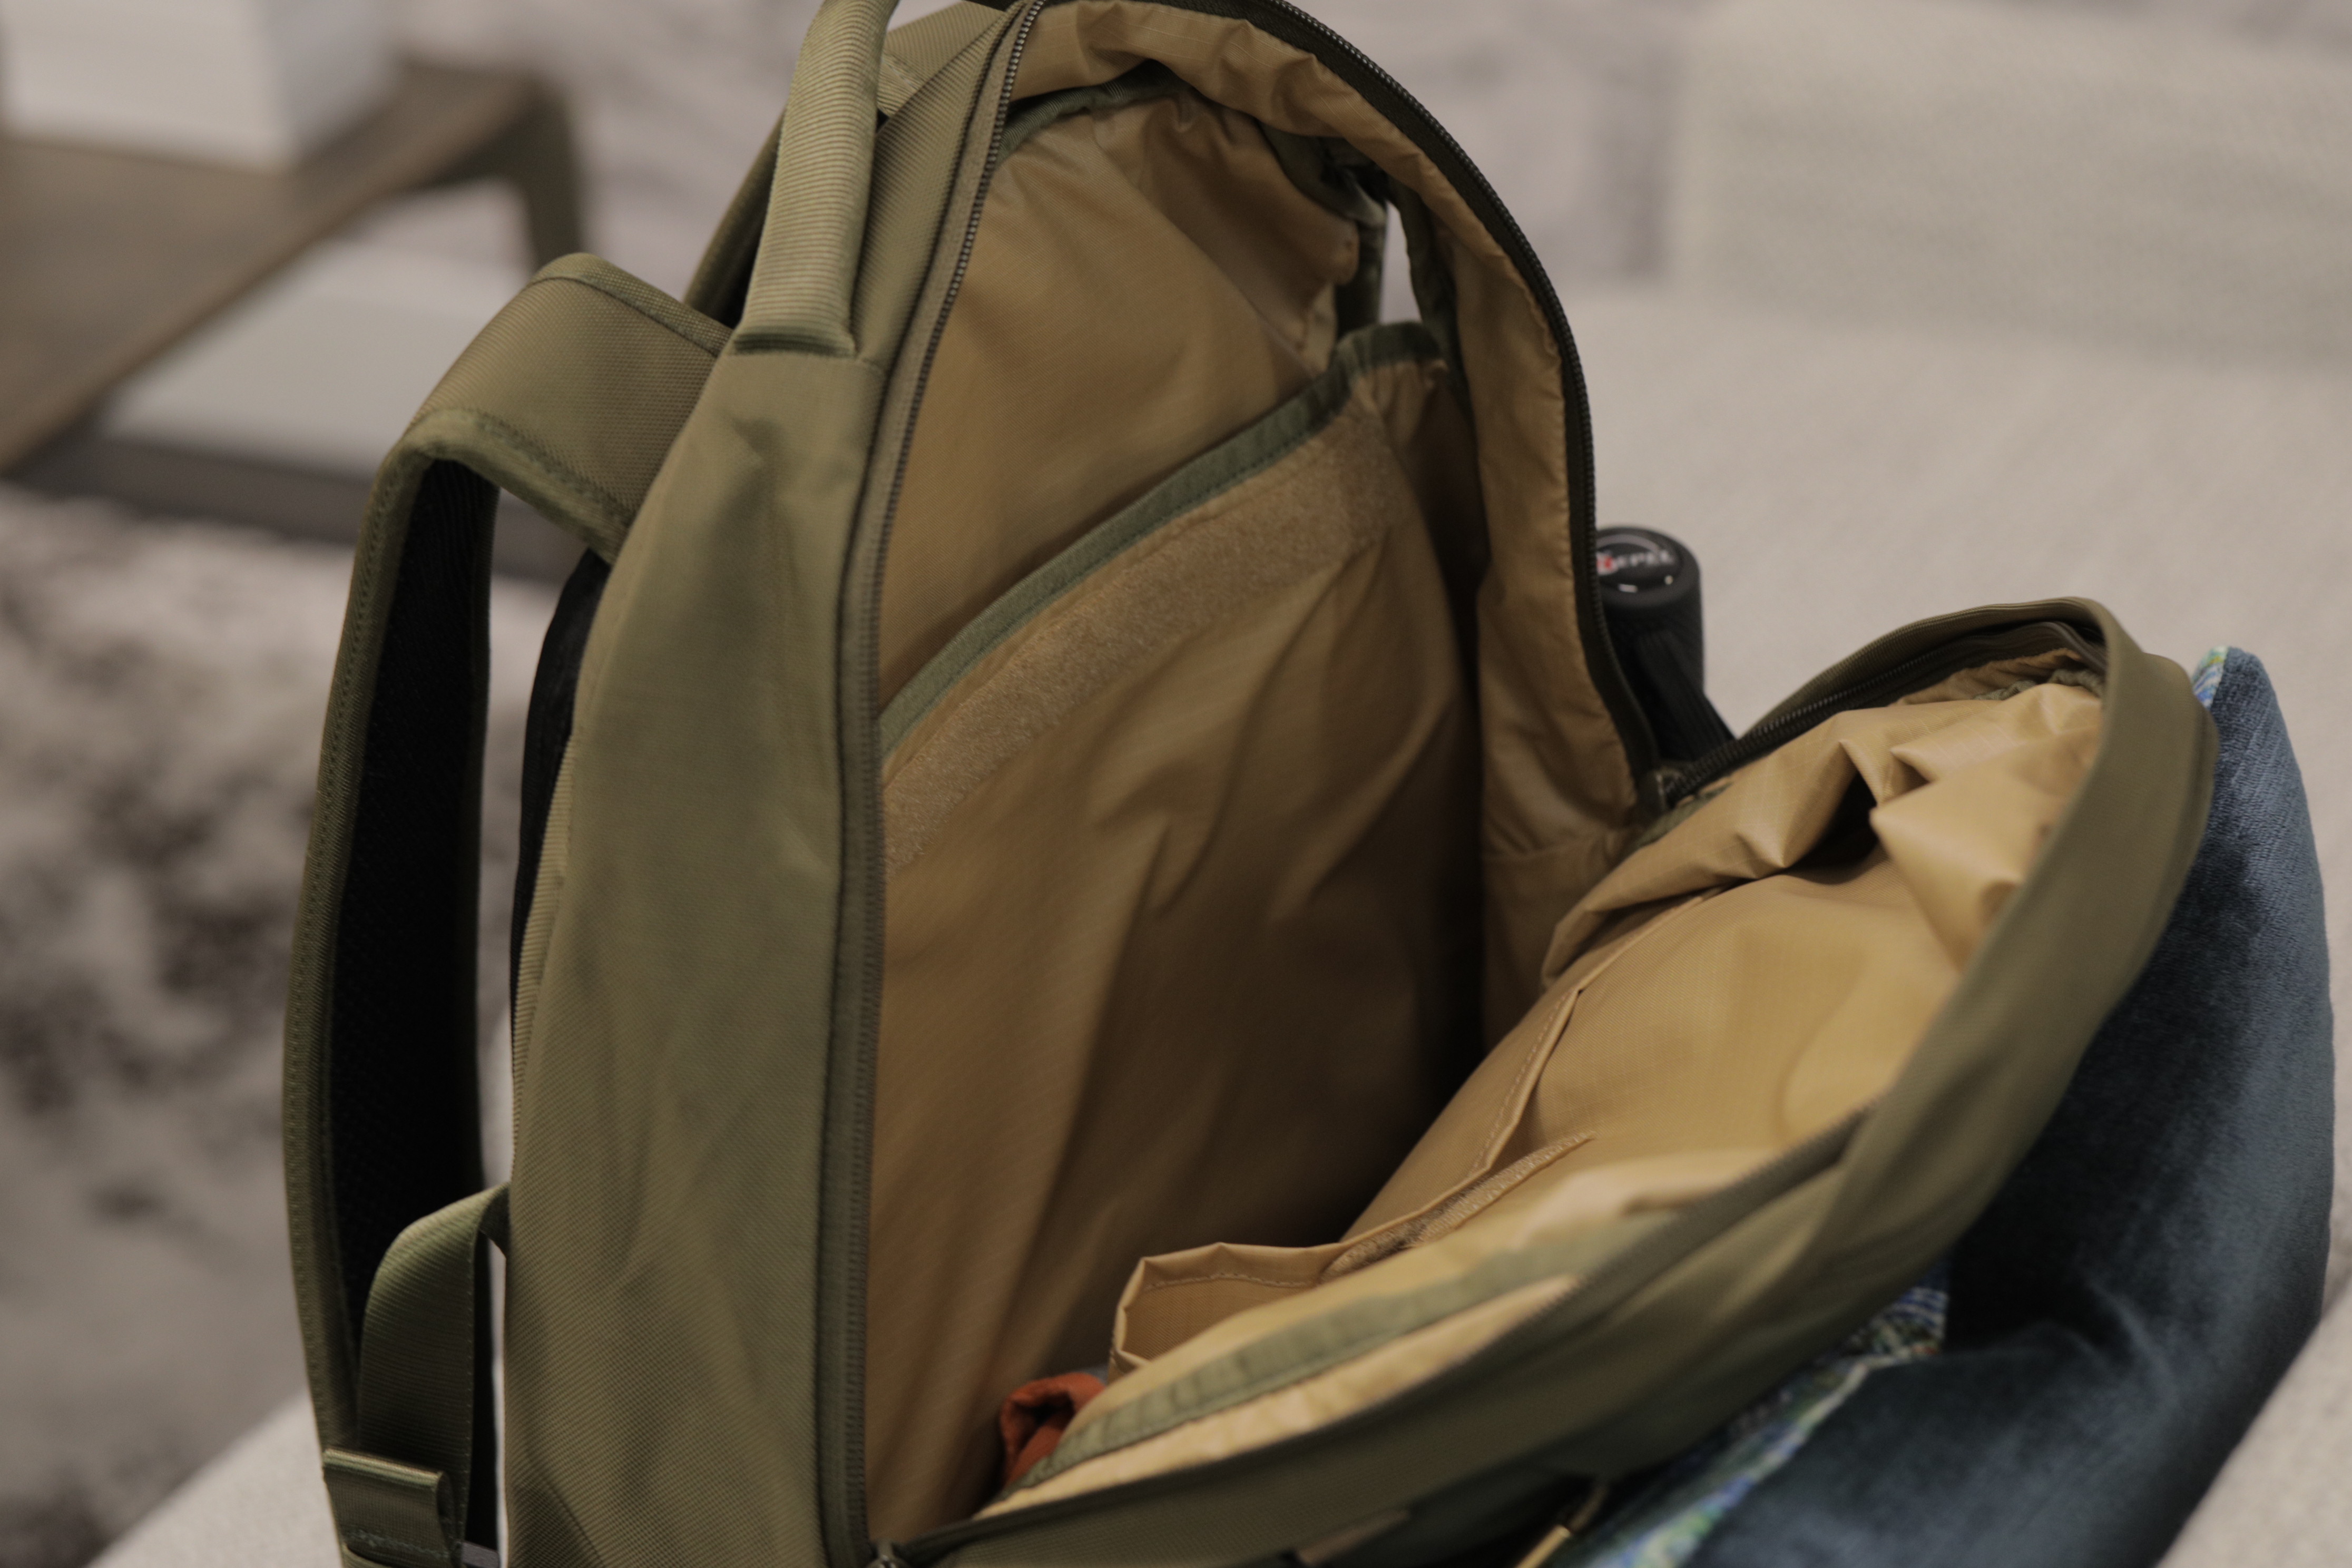 Timbuk2 S Parker Is A Commuter Backpack Made For The Long Haul Pnu